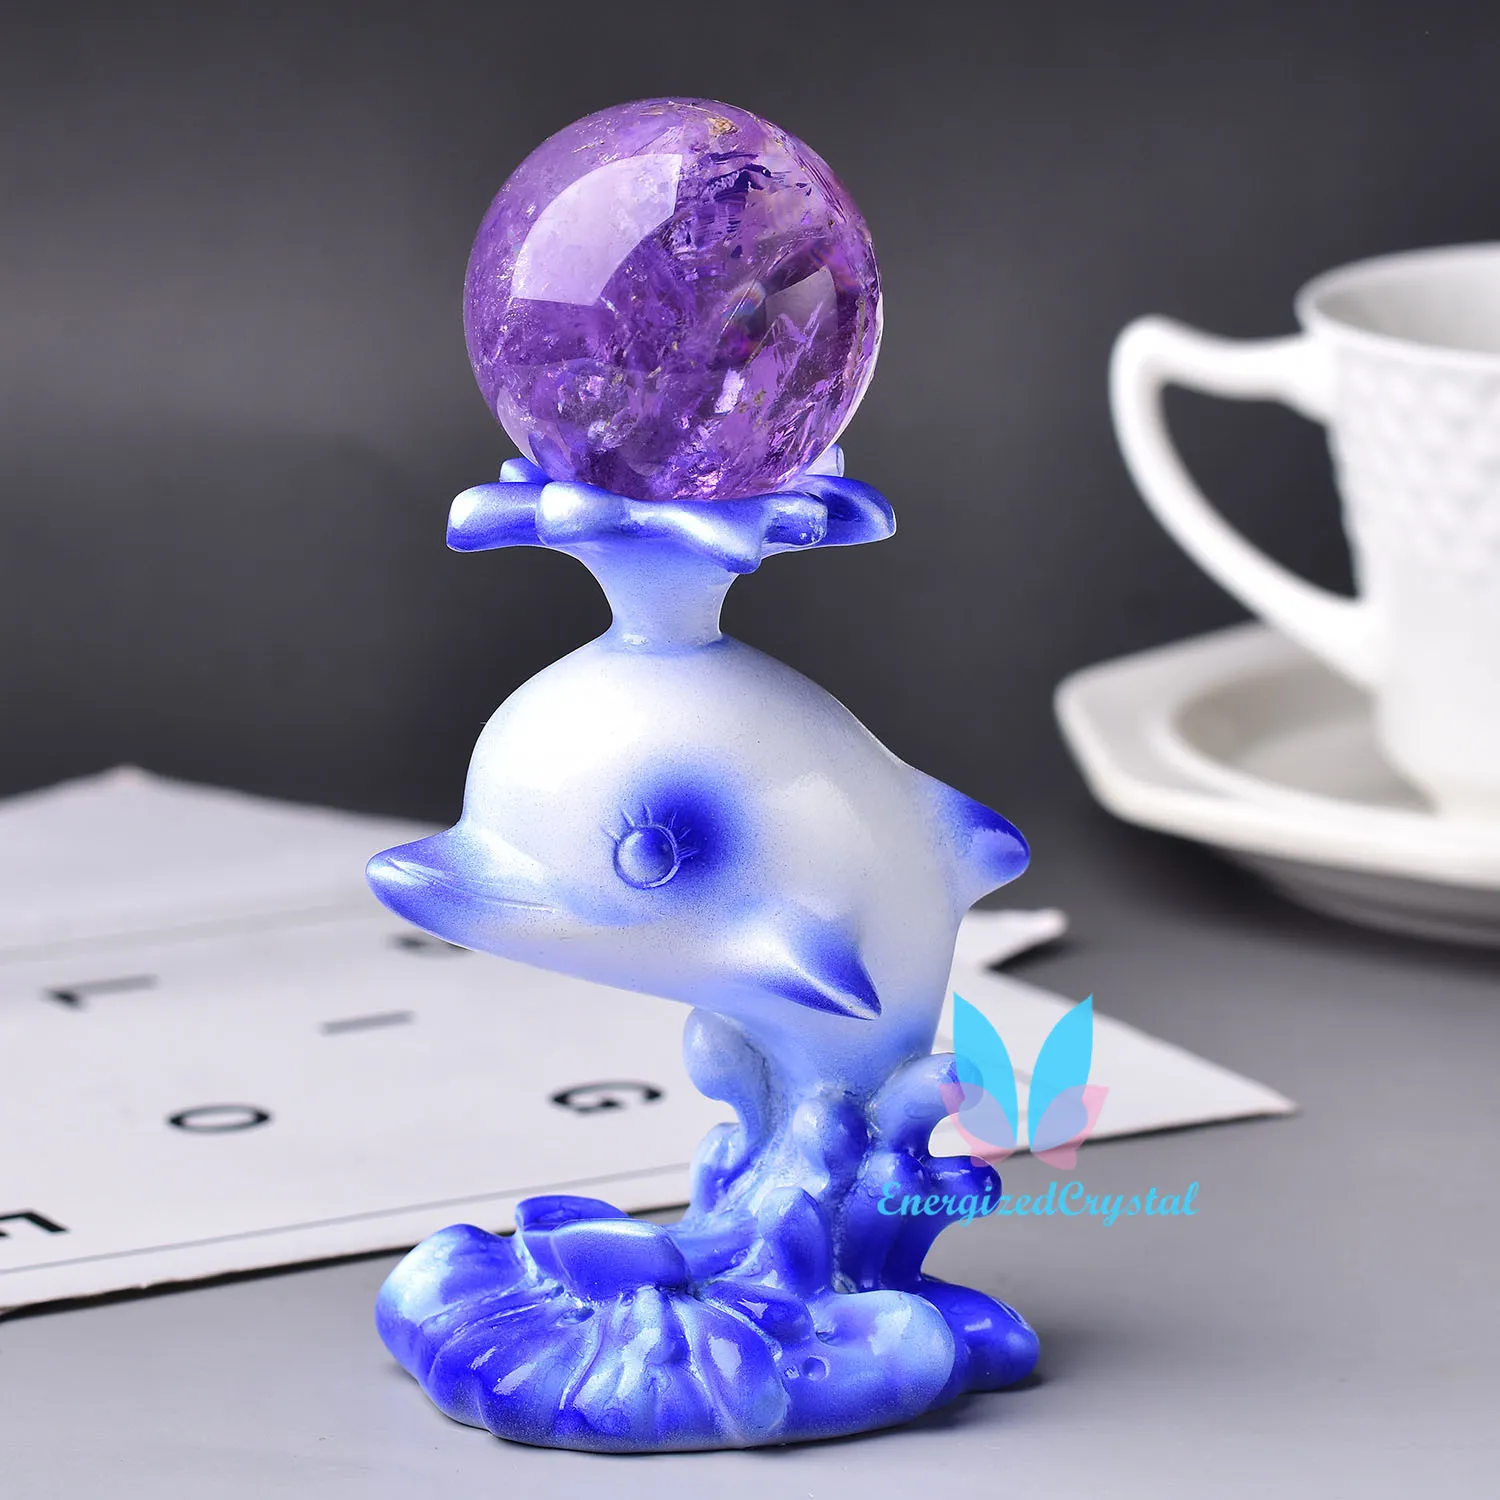 Dolphin Shape Crystal Ball Display Stands Resin Home Decor Sphere Standhouder